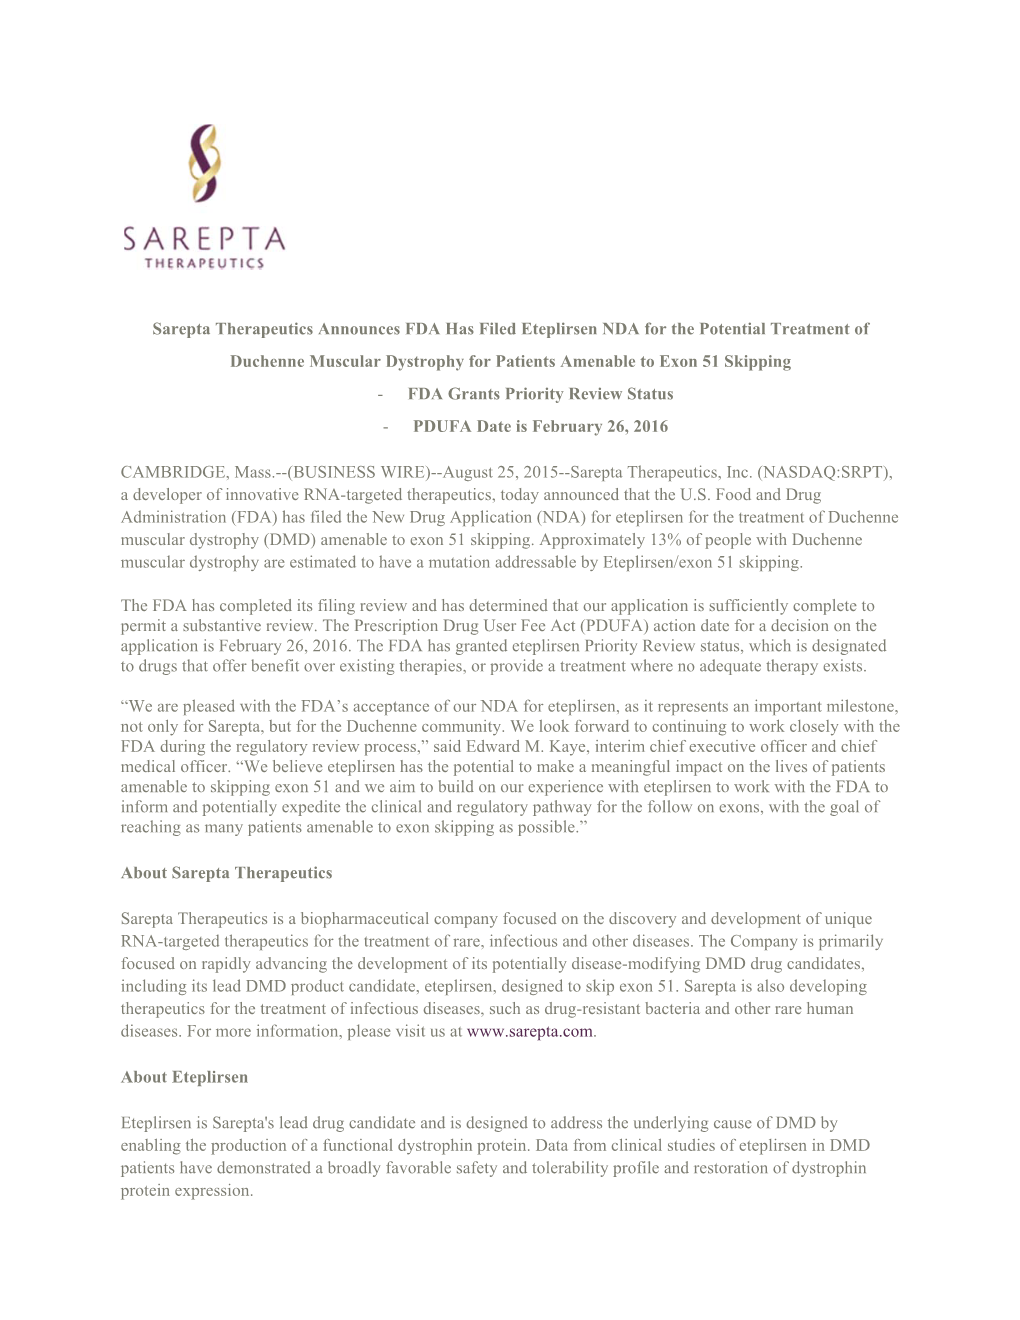 Sarepta Therapeutics Announces FDA Has Filed Eteplirsen NDA for the Potential Treatment of Duchenne Muscular Dystrophy for Patie